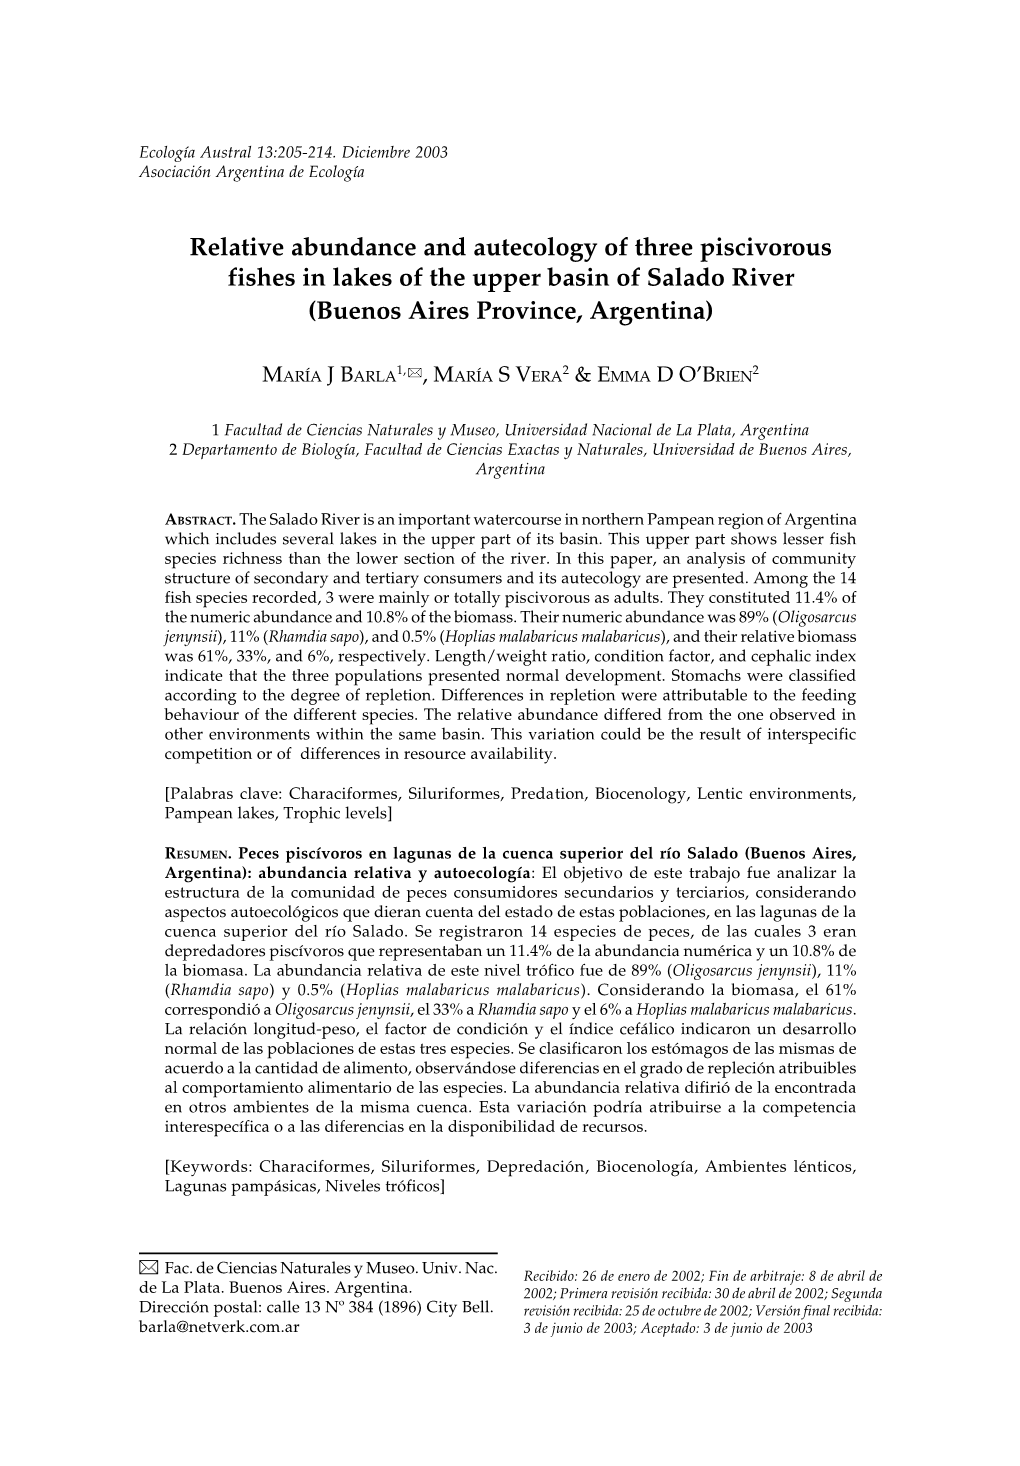 Relative Abundance and Autecology of Three Piscivorous Fishes in Lakes of the Upper Basin of Salado River (Buenos Aires Province, Argentina)